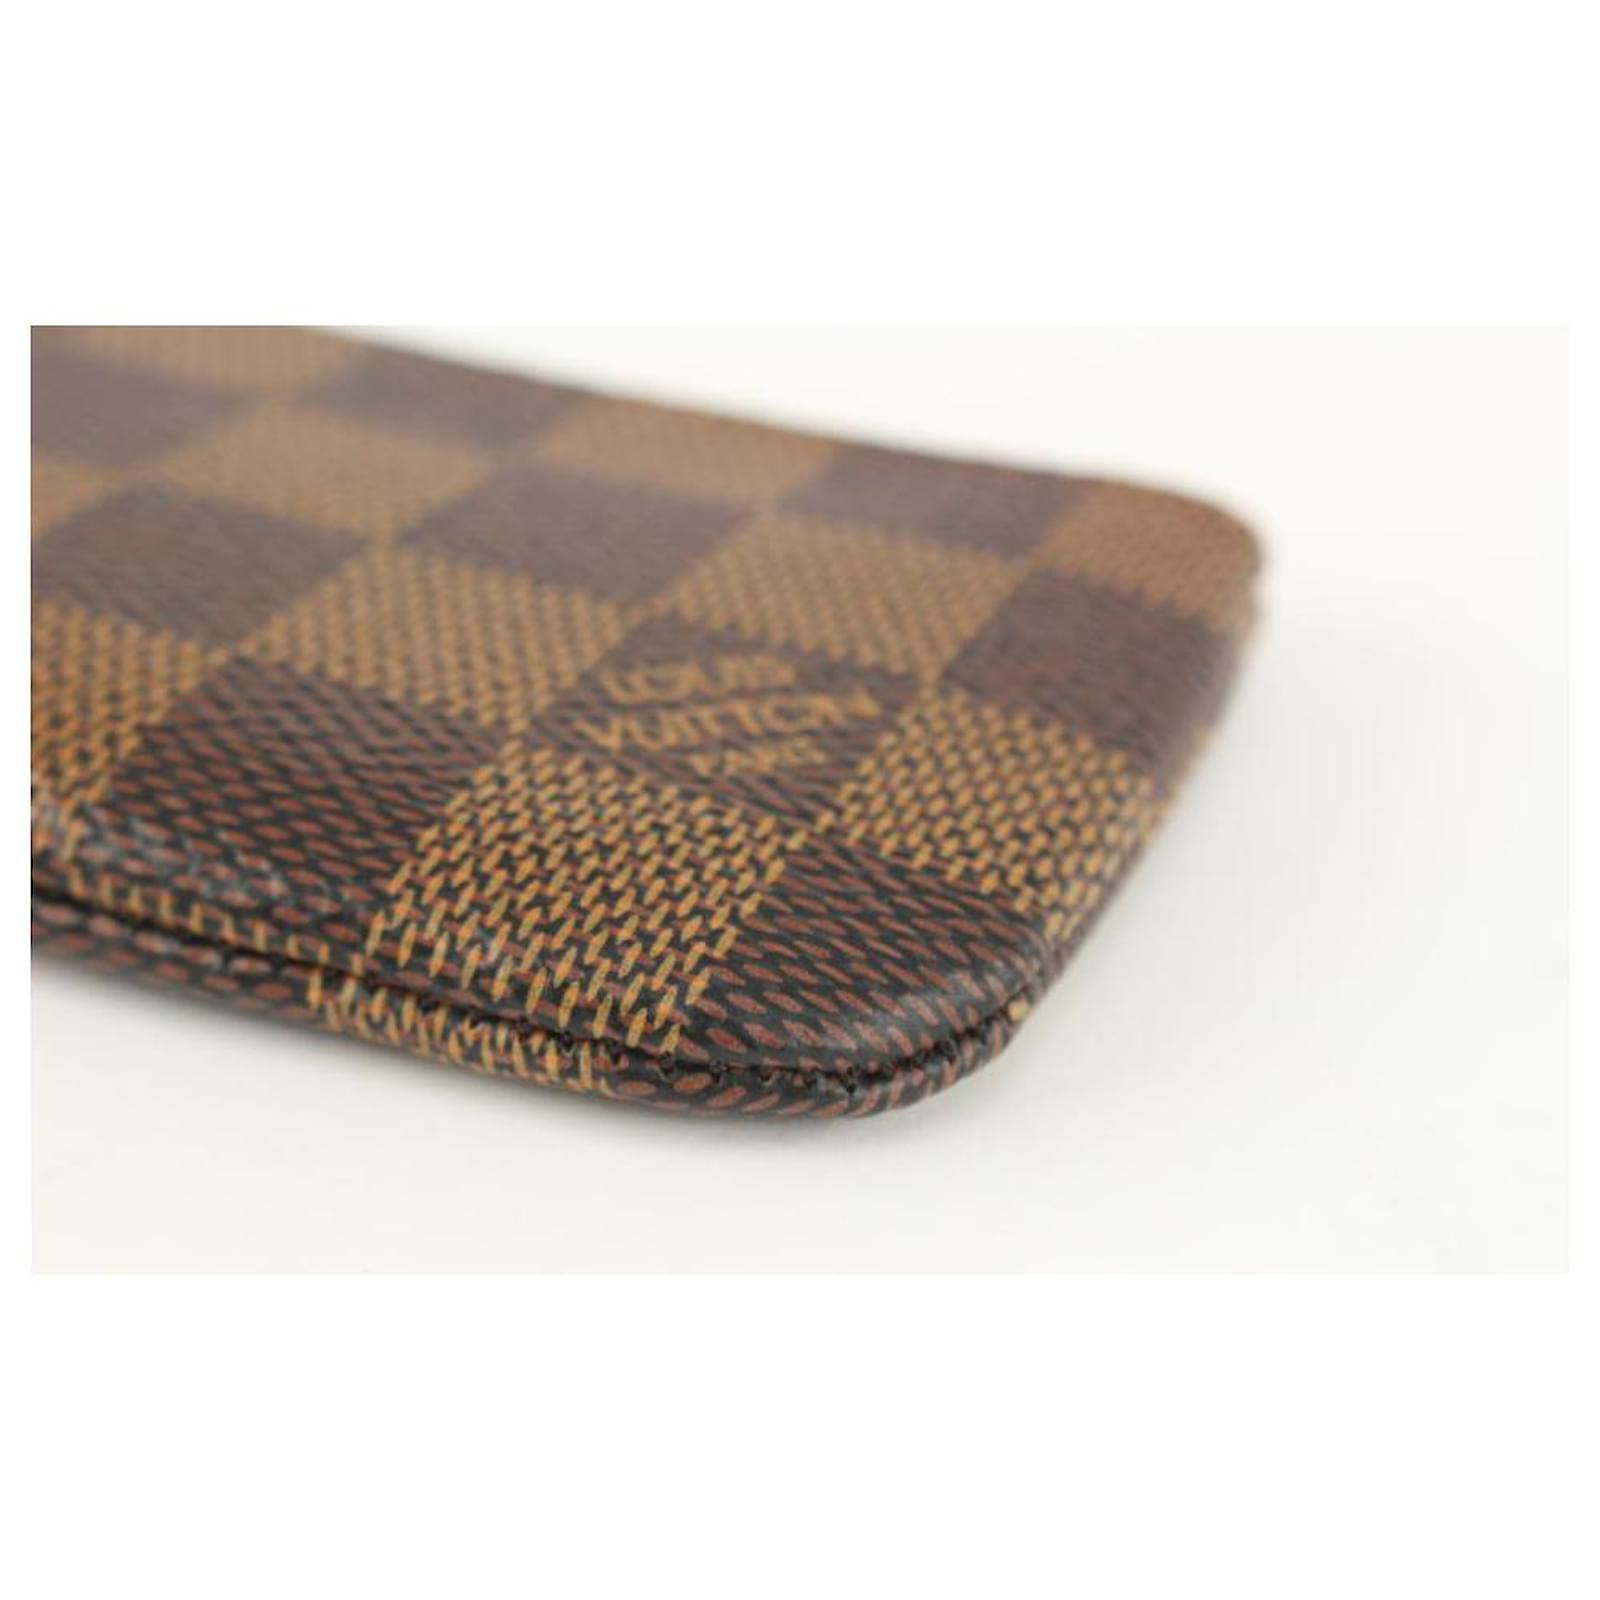 🔥NEW LOUIS VUITTON Key Pouch Cles Damier Ebene Coin Card Wallet HOT GIFT❤️